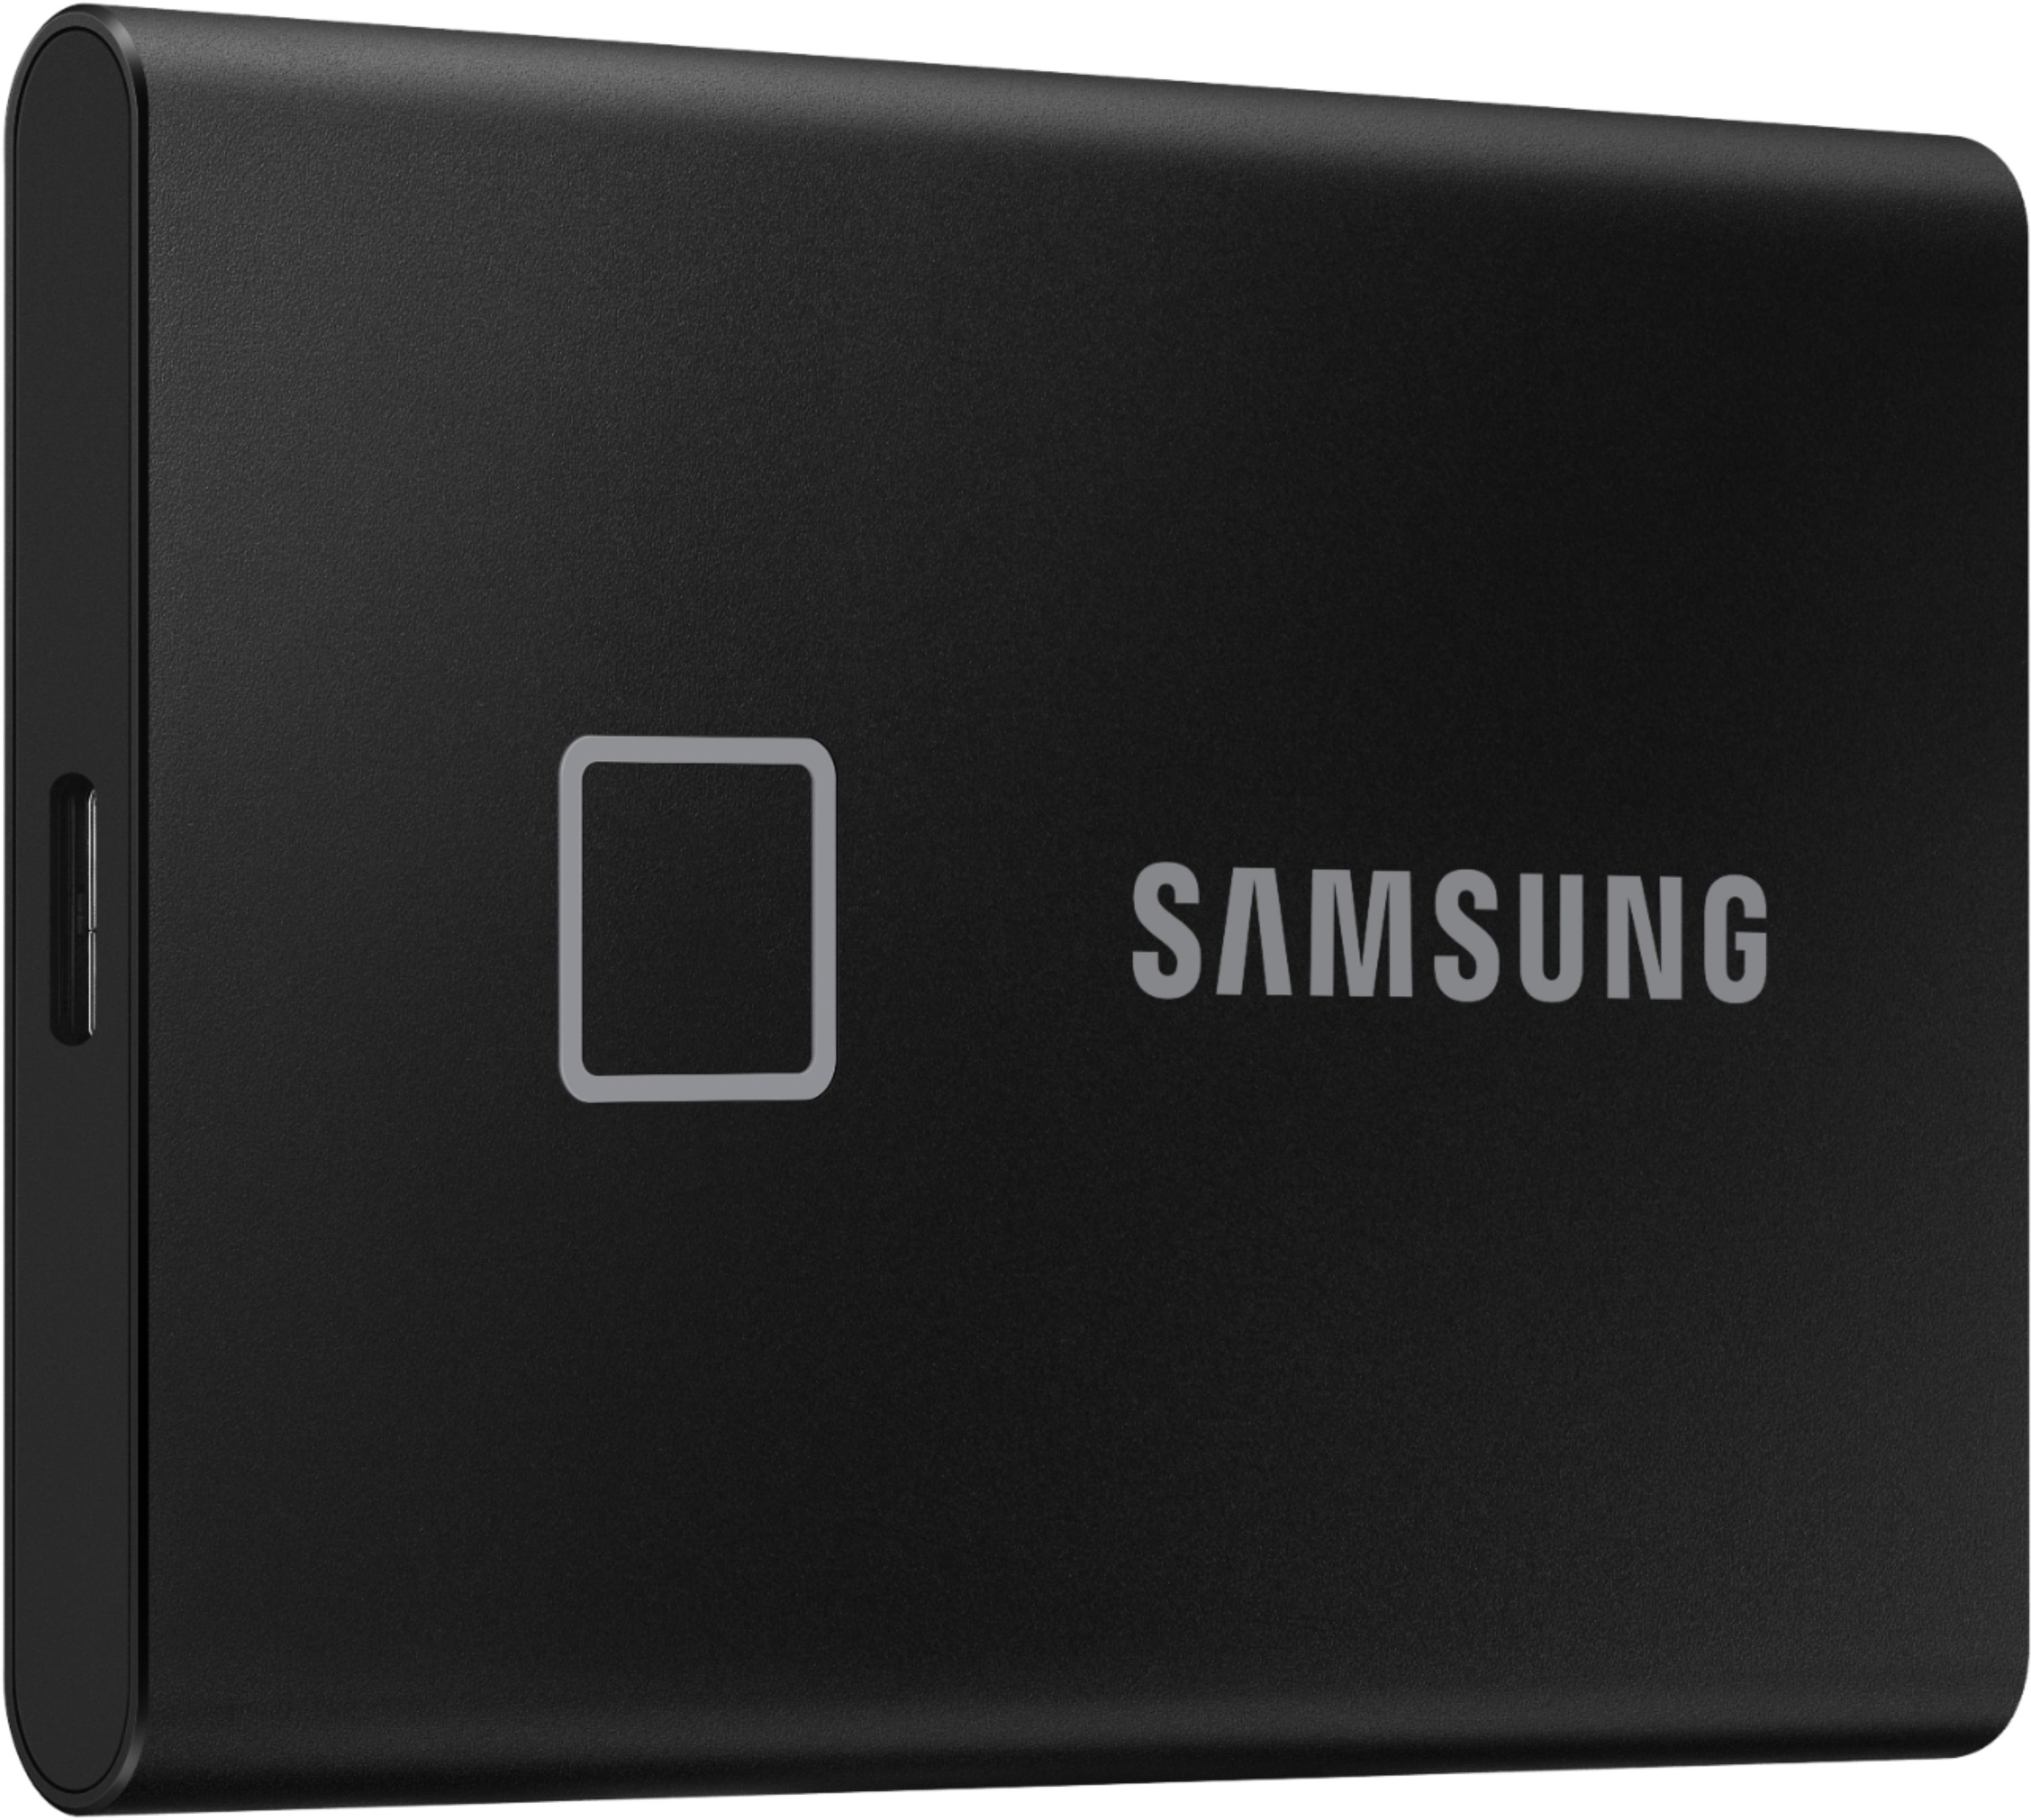 Samsung Geek Squad Certified Refurbished Touch 500GB External 3.2 Gen 2 Portable SSD with Hardware Encryption MU-PC500K/WW - Best Buy